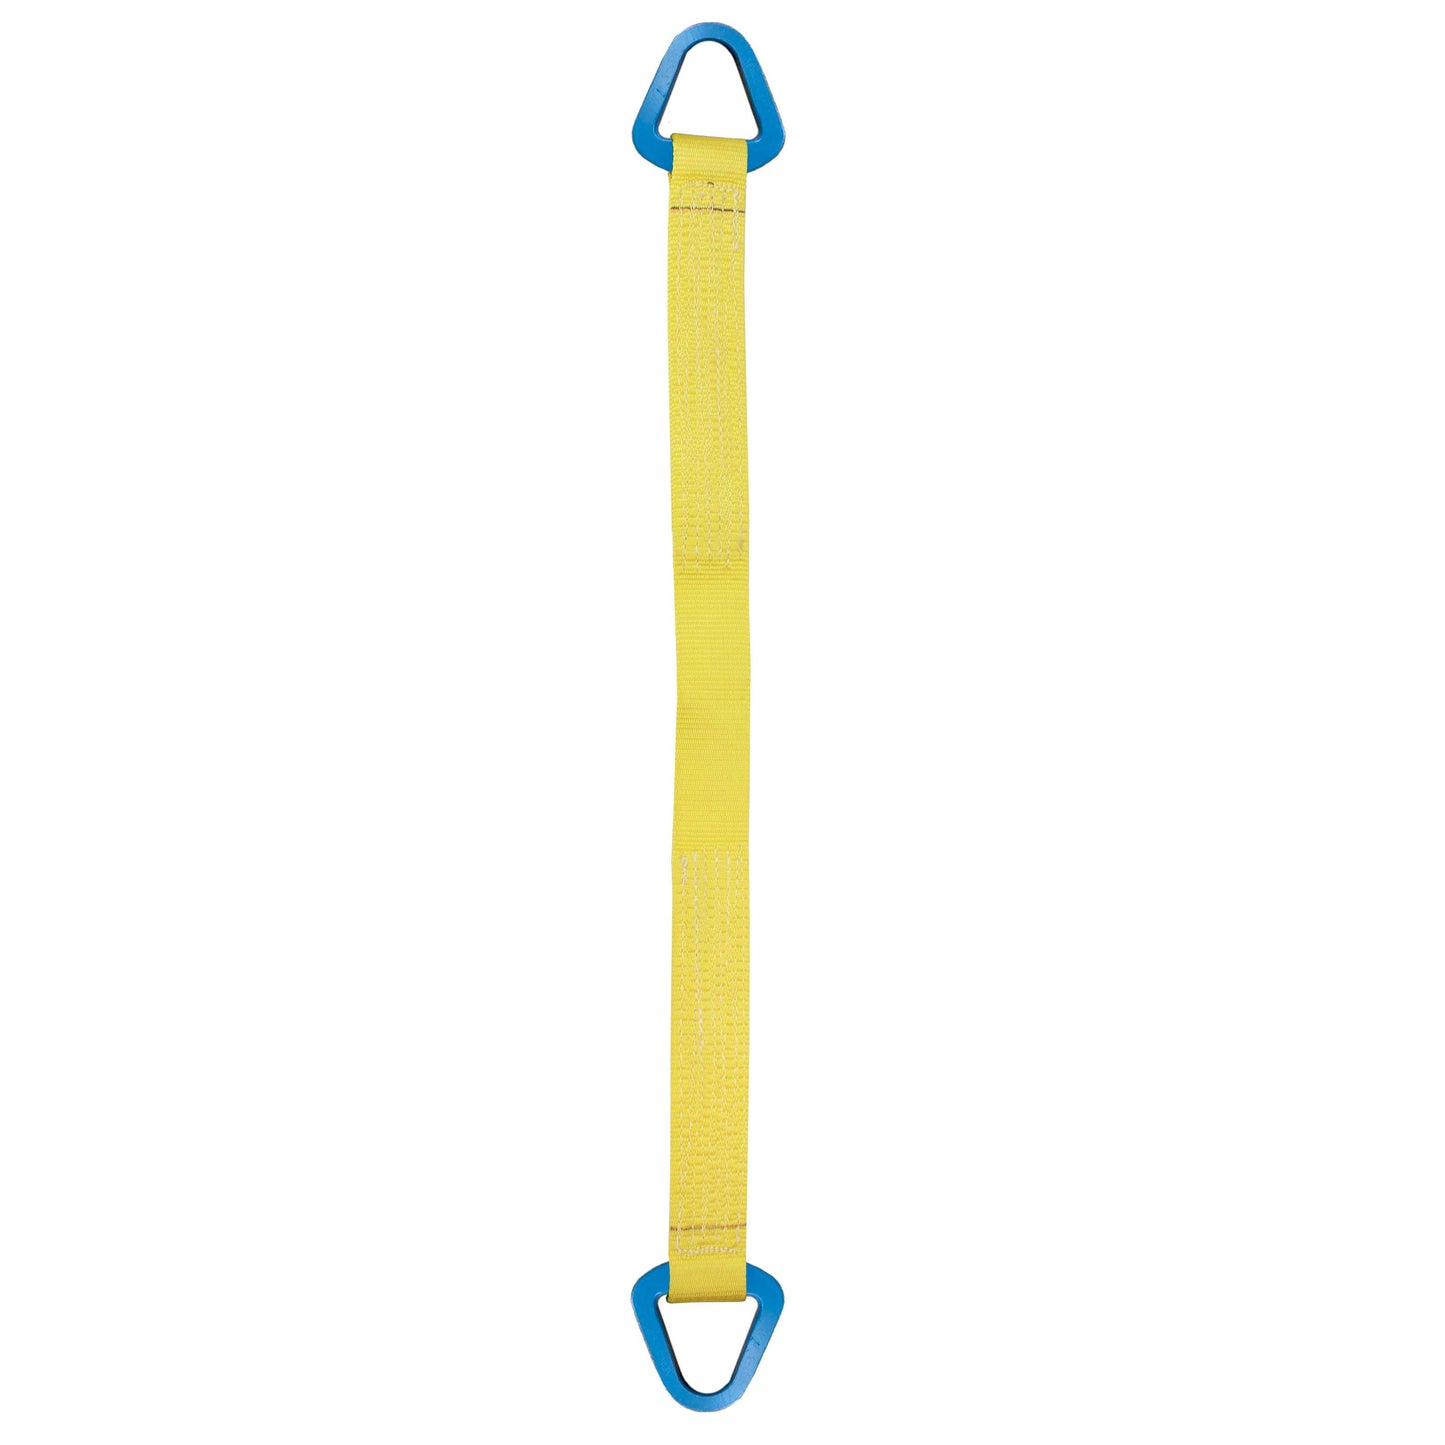 Nylon Lifting Sling Triangle 3 inch x 12 foot 2ply image 1 of 2